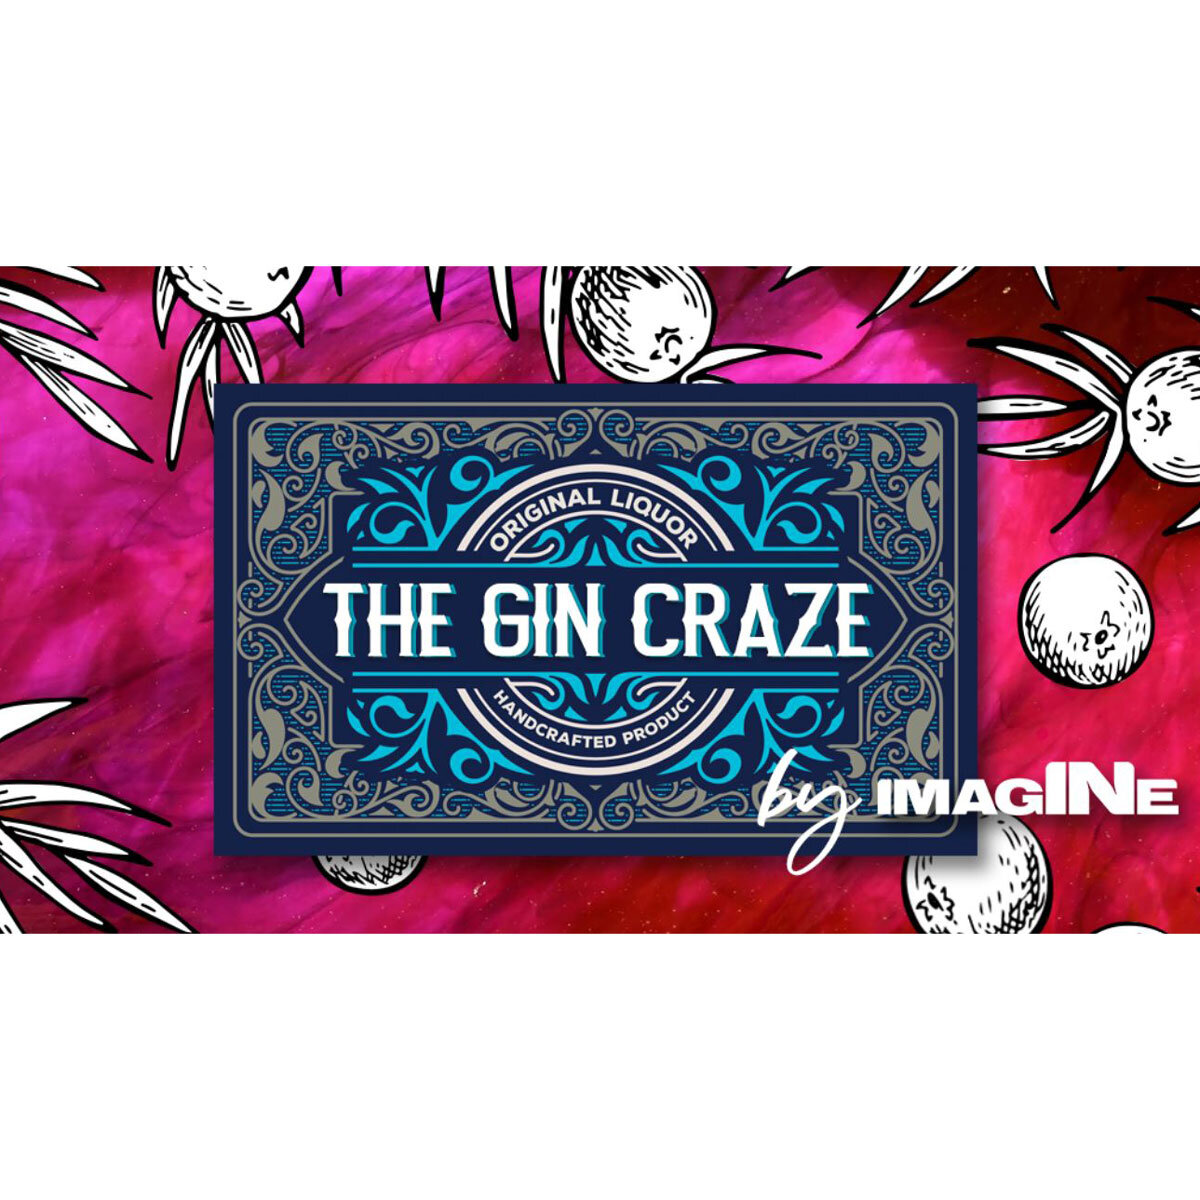 Buy Imagine Experience The Gin Craze Cover Image at Costco.co.uk